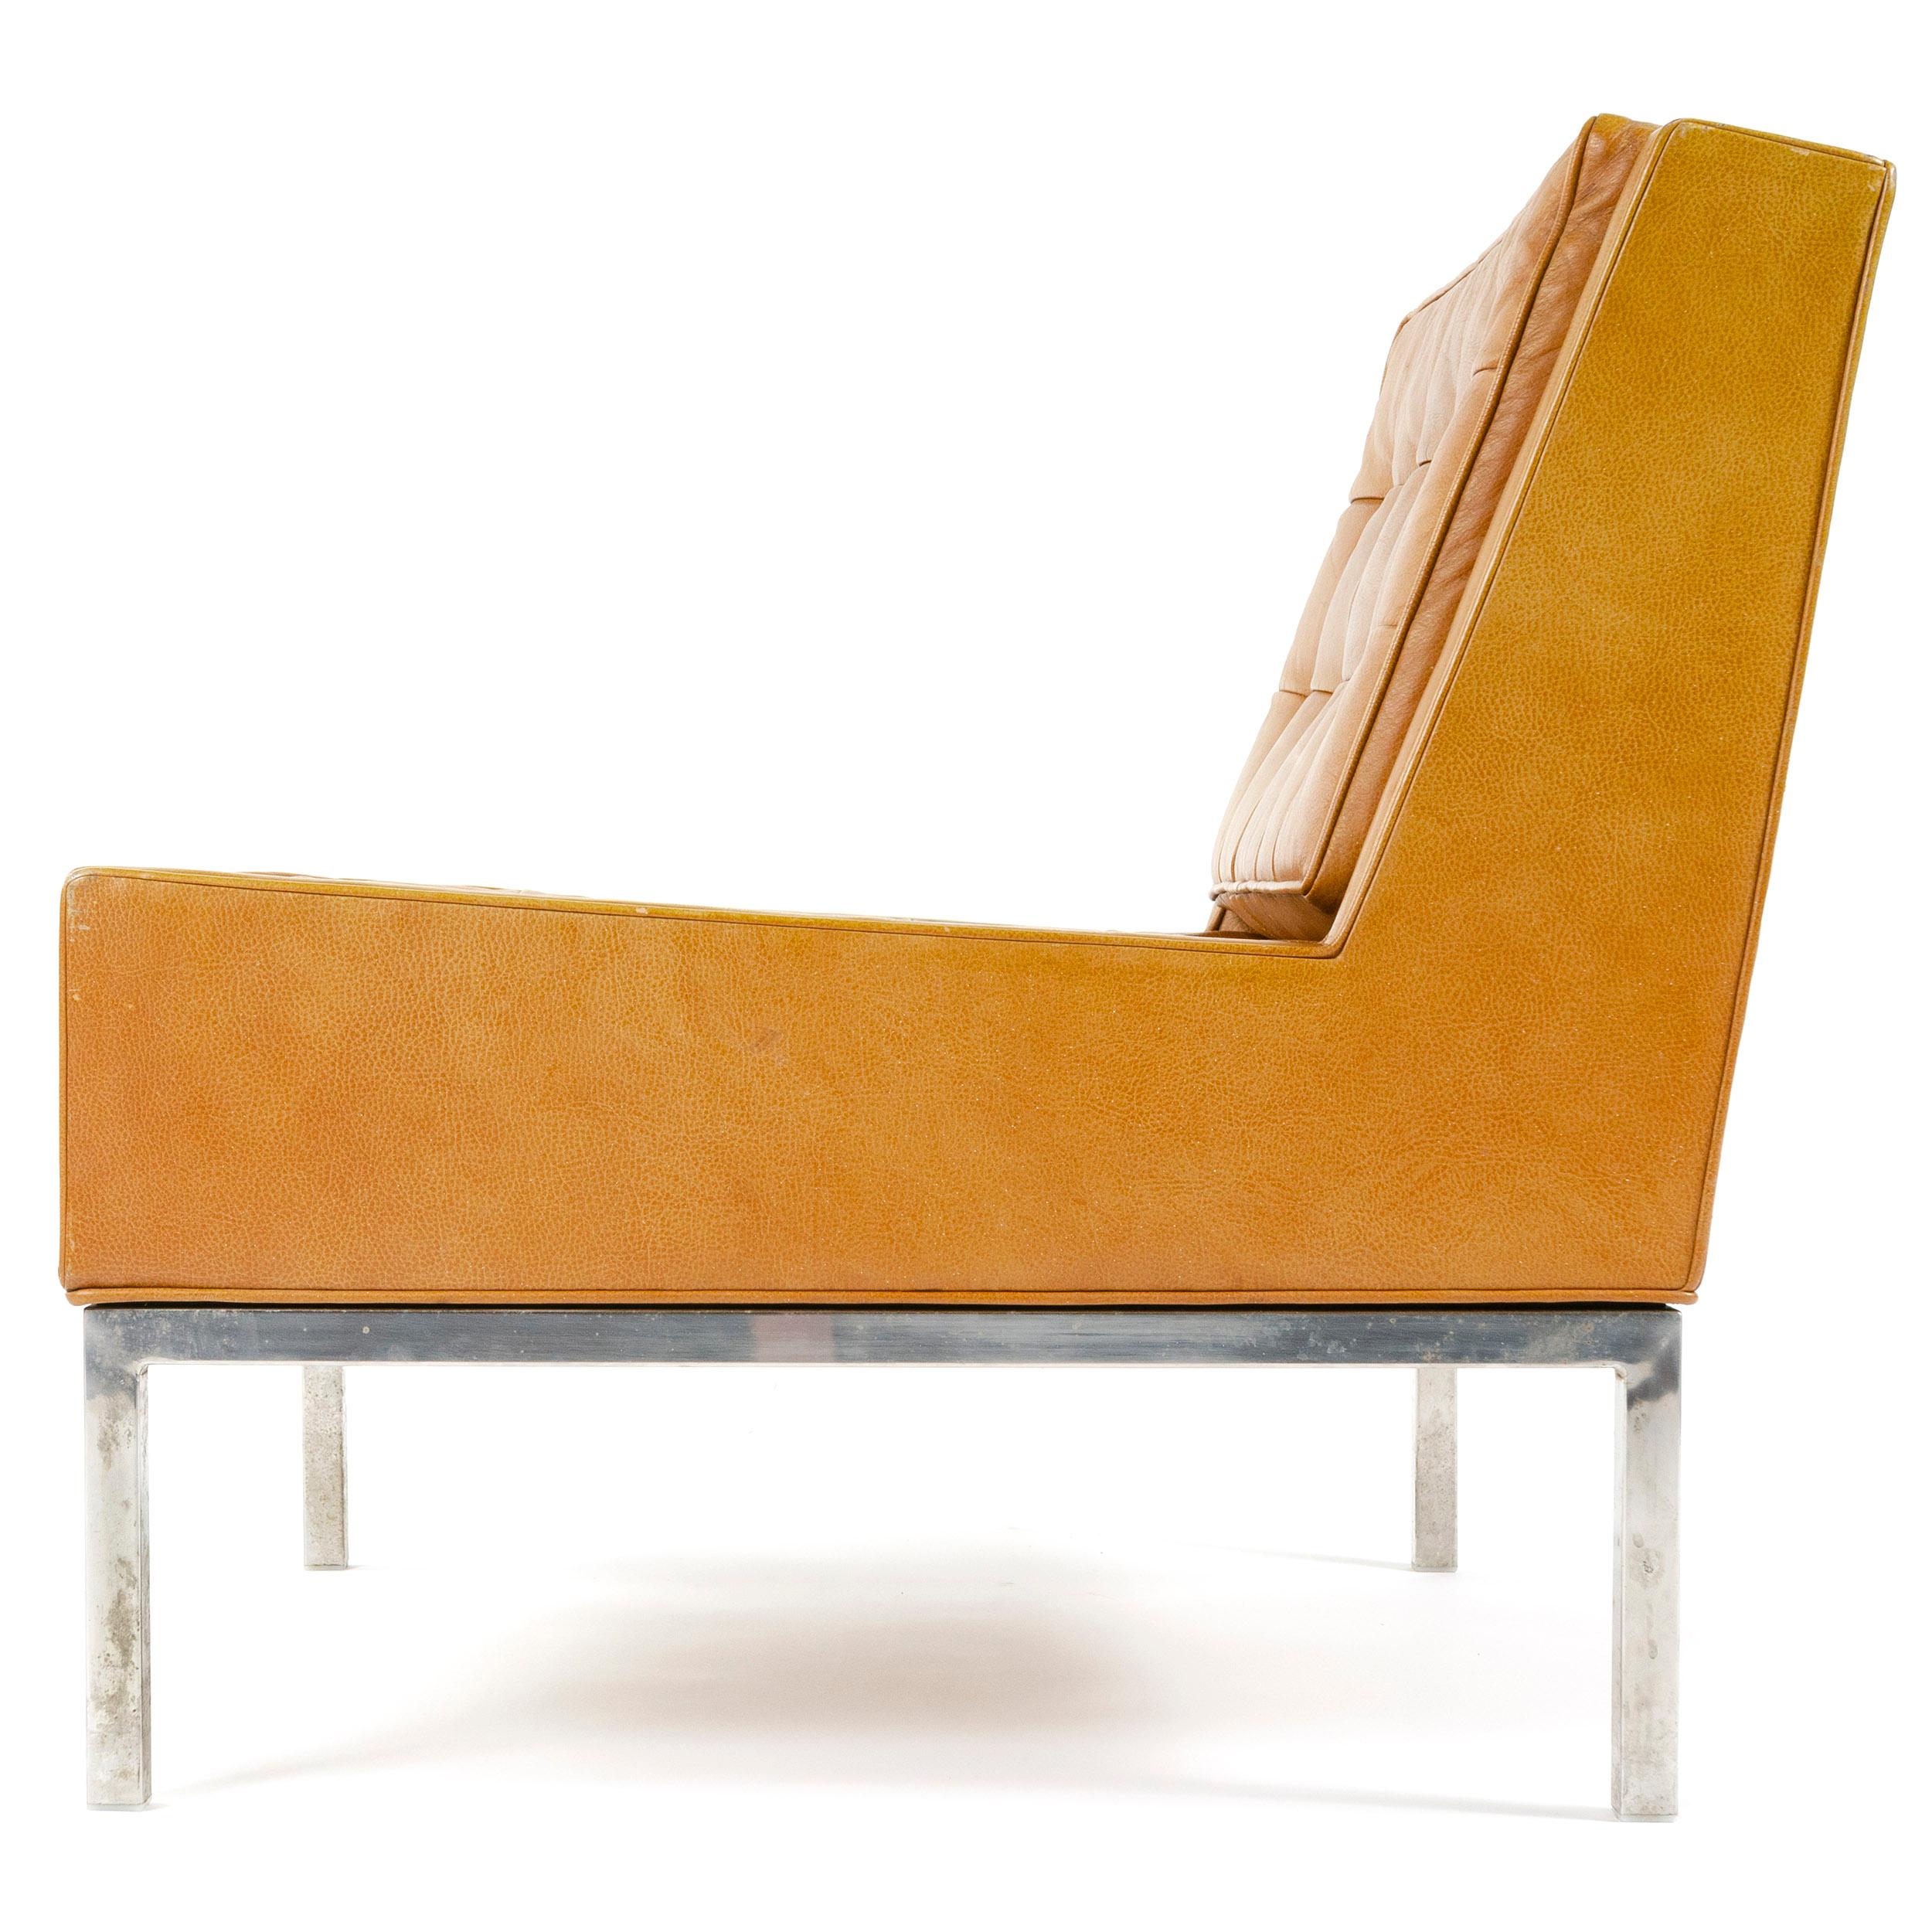 American 1960s Leather Lounge Chair by Edward Wormley for Dunbar For Sale